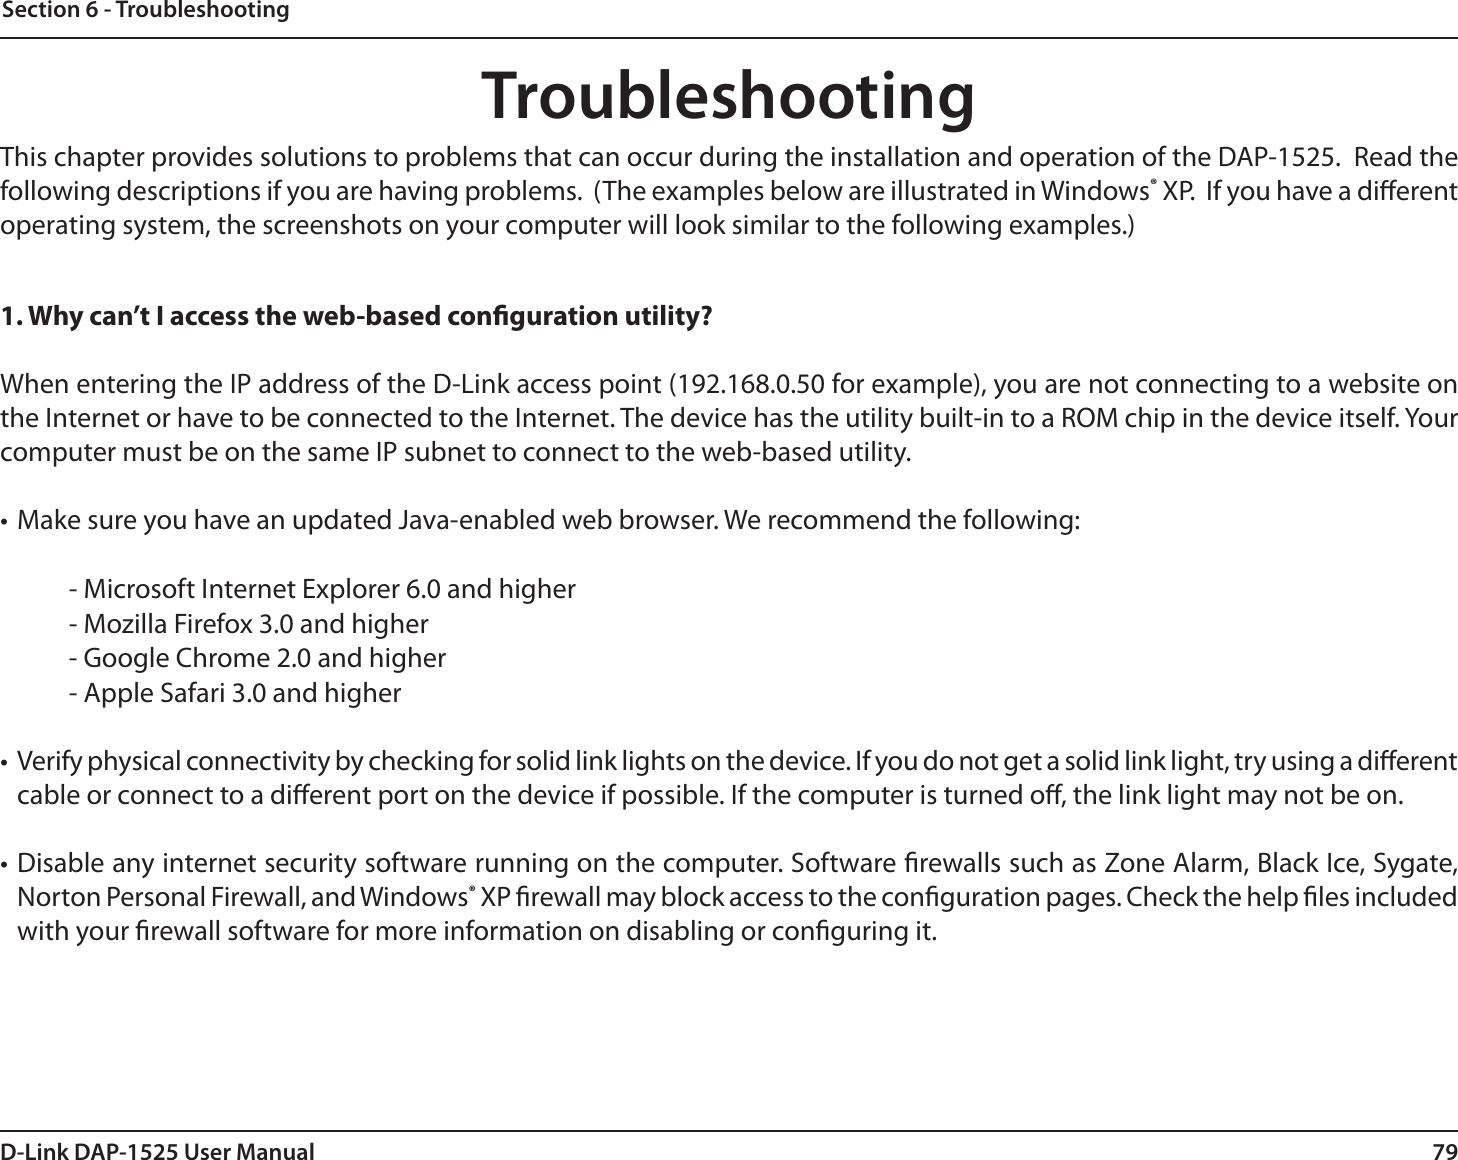 79D-Link DAP-1525 User ManualSection 6 - TroubleshootingTroubleshootingThis chapter provides solutions to problems that can occur during the installation and operation of the DAP-1525.  Read the following descriptions if you are having problems.  (The examples below are illustrated in Windows® XP.  If you have a dierent operating system, the screenshots on your computer will look similar to the following examples.)1. Why can’t I access the web-based conguration utility?When entering the IP address of the D-Link access point (192.168.0.50 for example), you are not connecting to a website on the Internet or have to be connected to the Internet. The device has the utility built-in to a ROM chip in the device itself. Your computer must be on the same IP subnet to connect to the web-based utility. • Make sure you have an updated Java-enabled web browser. We recommend the following: - Microsoft Internet Explorer 6.0 and higher- Mozilla Firefox 3.0 and higher- Google Chrome 2.0 and higher- Apple Safari 3.0 and higher•  Verify physical connectivity by checking for solid link lights on the device. If you do not get a solid link light, try using a dierent cable or connect to a dierent port on the device if possible. If the computer is turned o, the link light may not be on.• Disable any internet security software running on the computer. Software rewalls such as Zone Alarm, Black Ice, Sygate, Norton Personal Firewall, and Windows® XP rewall may block access to the conguration pages. Check the help les included with your rewall software for more information on disabling or conguring it.